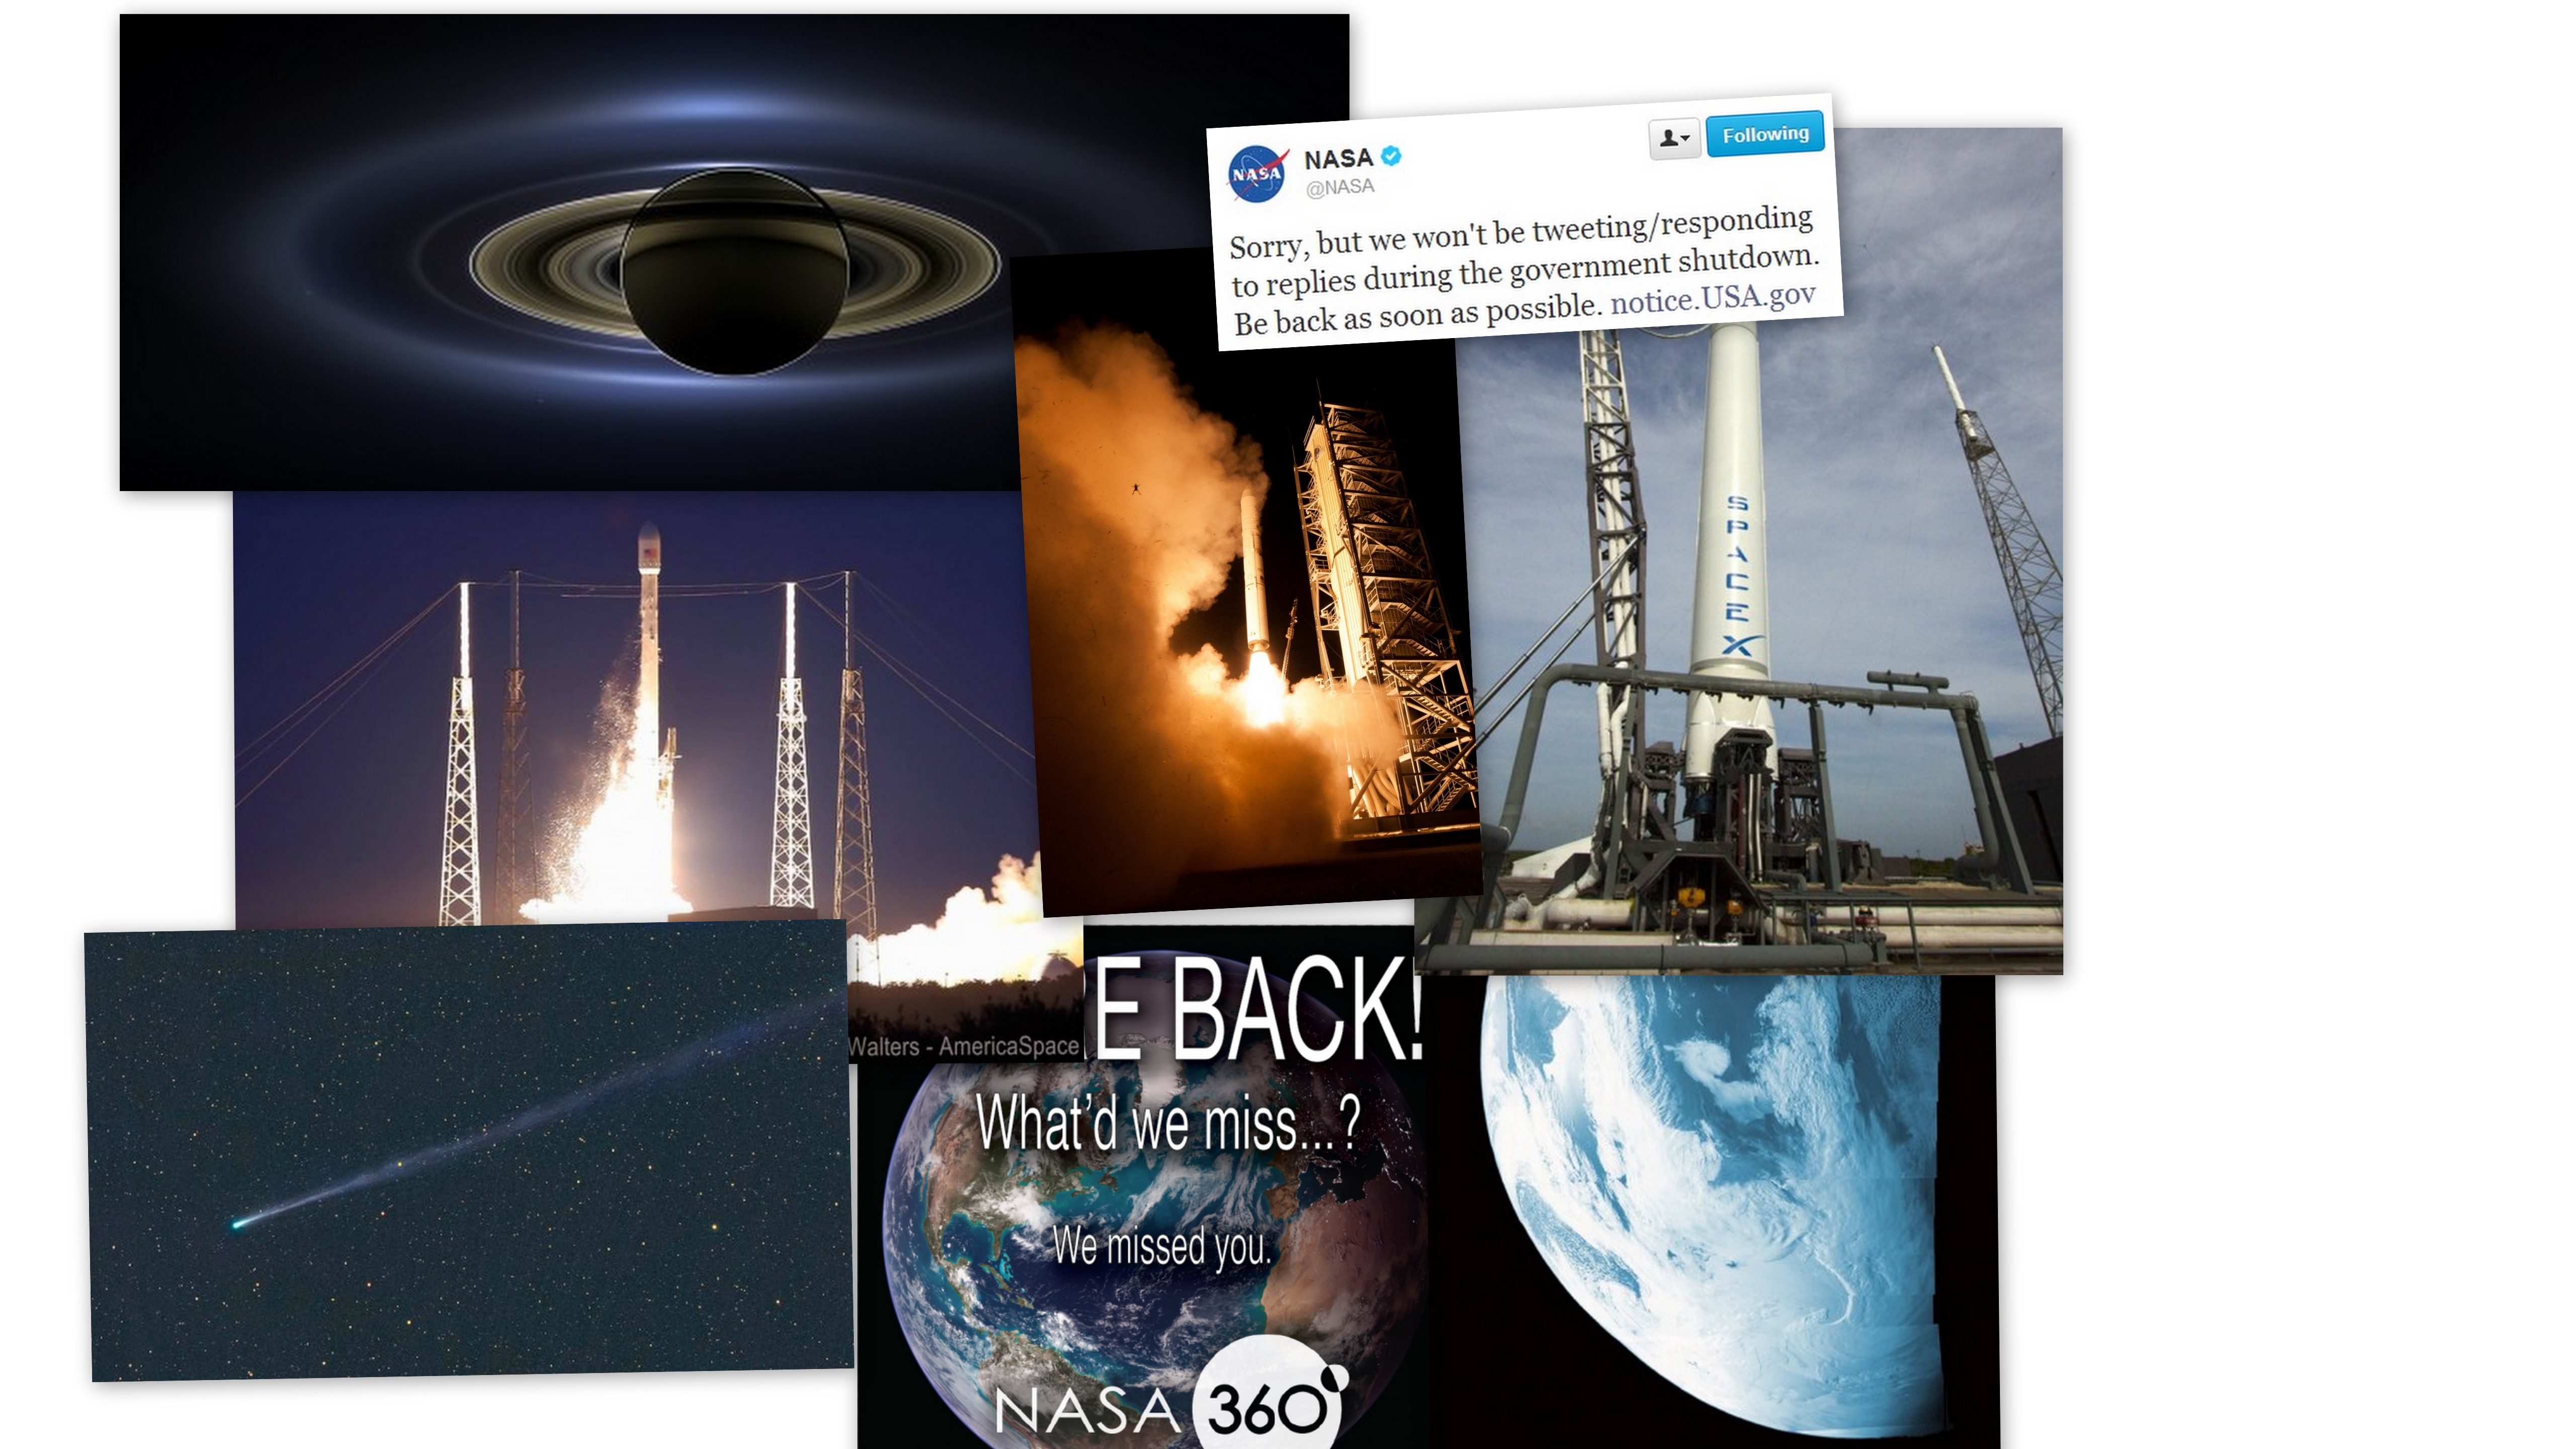 Shuttle/Shuttle Concept Restart: Fwd: Universe Today's Top 10 (or so) Stories of 2013